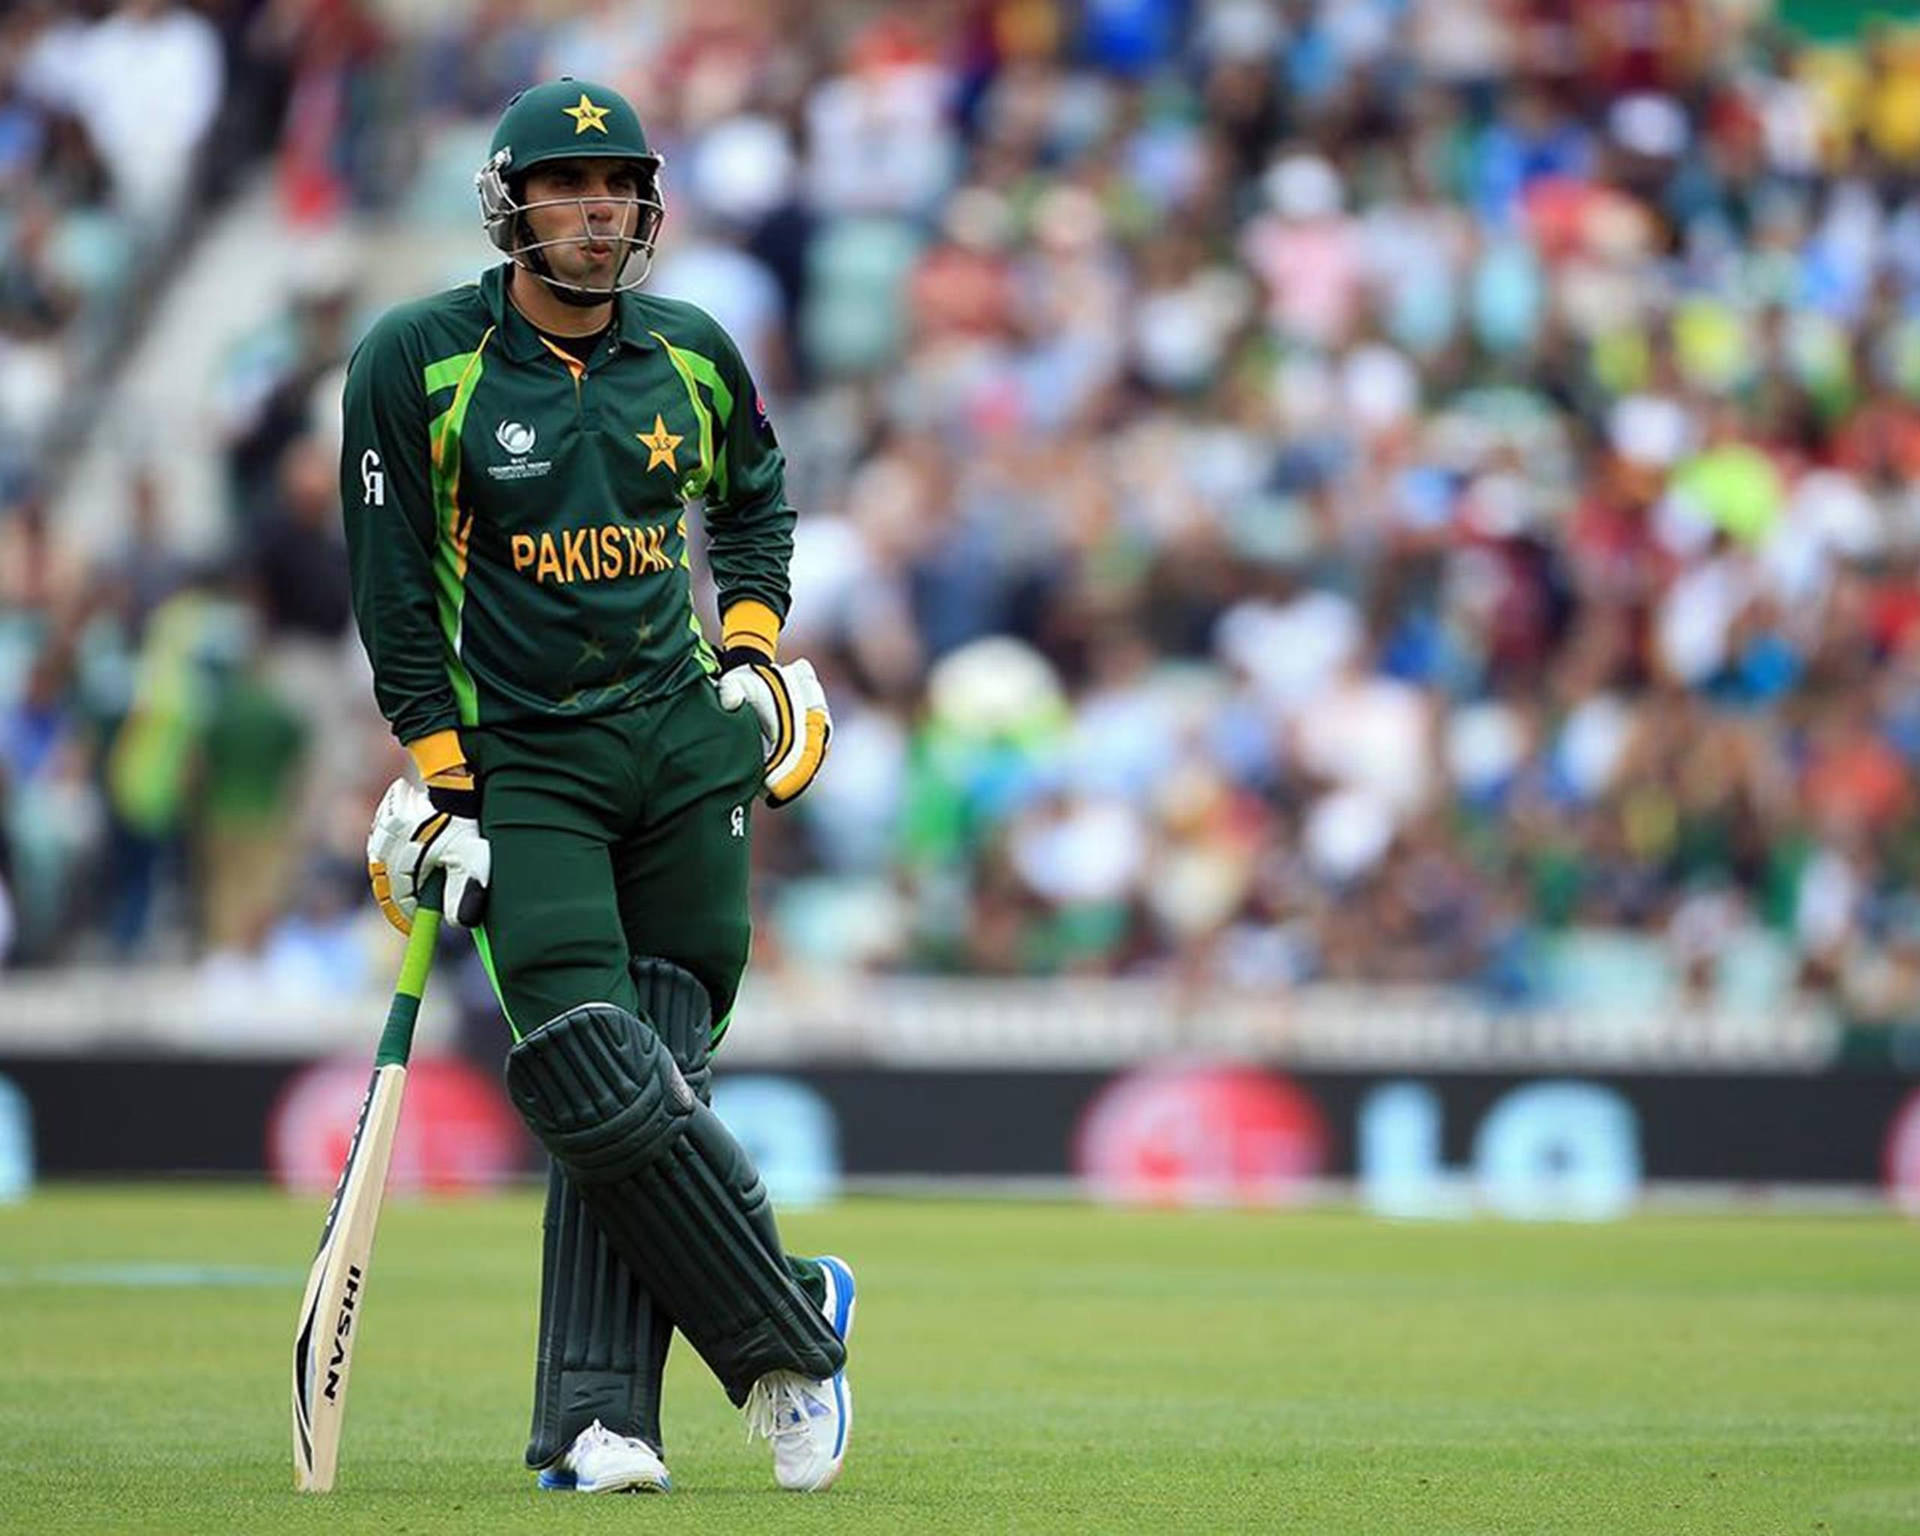 Caption: Misbah-ul-haq Of Pakistan Cricket Showing Determination On The Pitch. Background